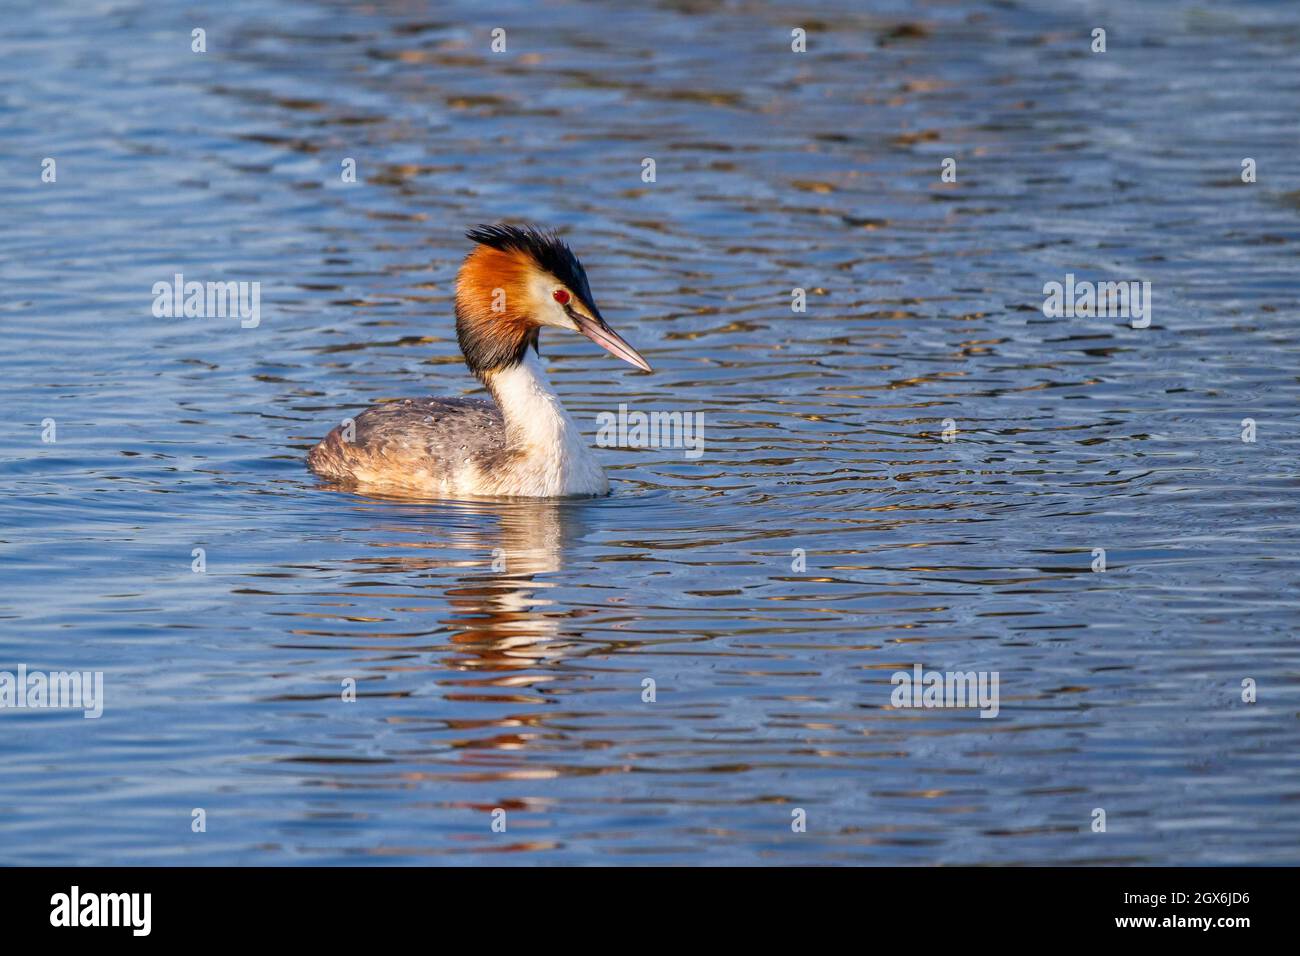 Great Crested Grebe Podiceps cristatus on Water Stock Photo